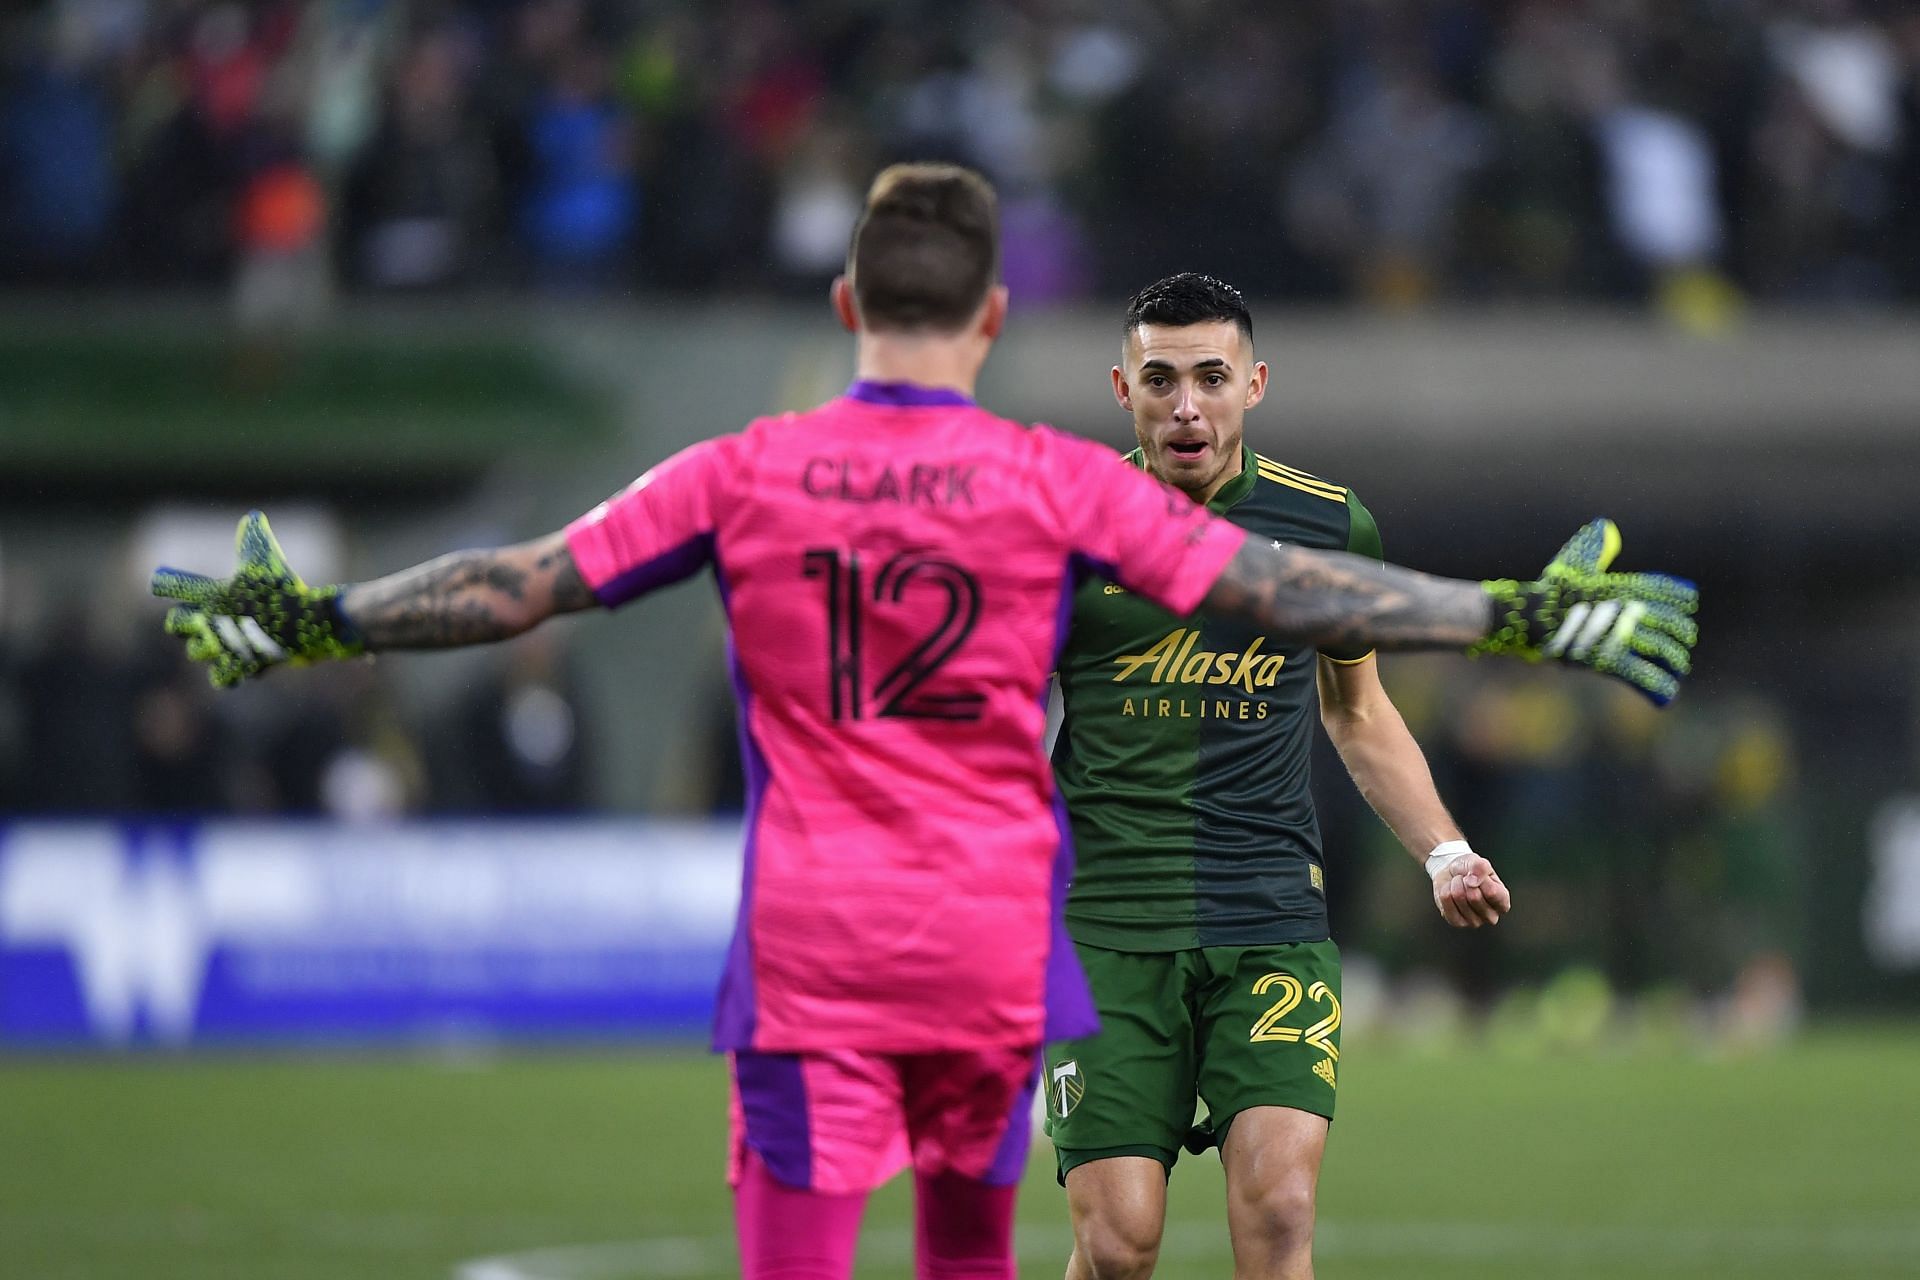 Portland Timbers take on the San Jose Earthquakes in their upcoming MLS fixture